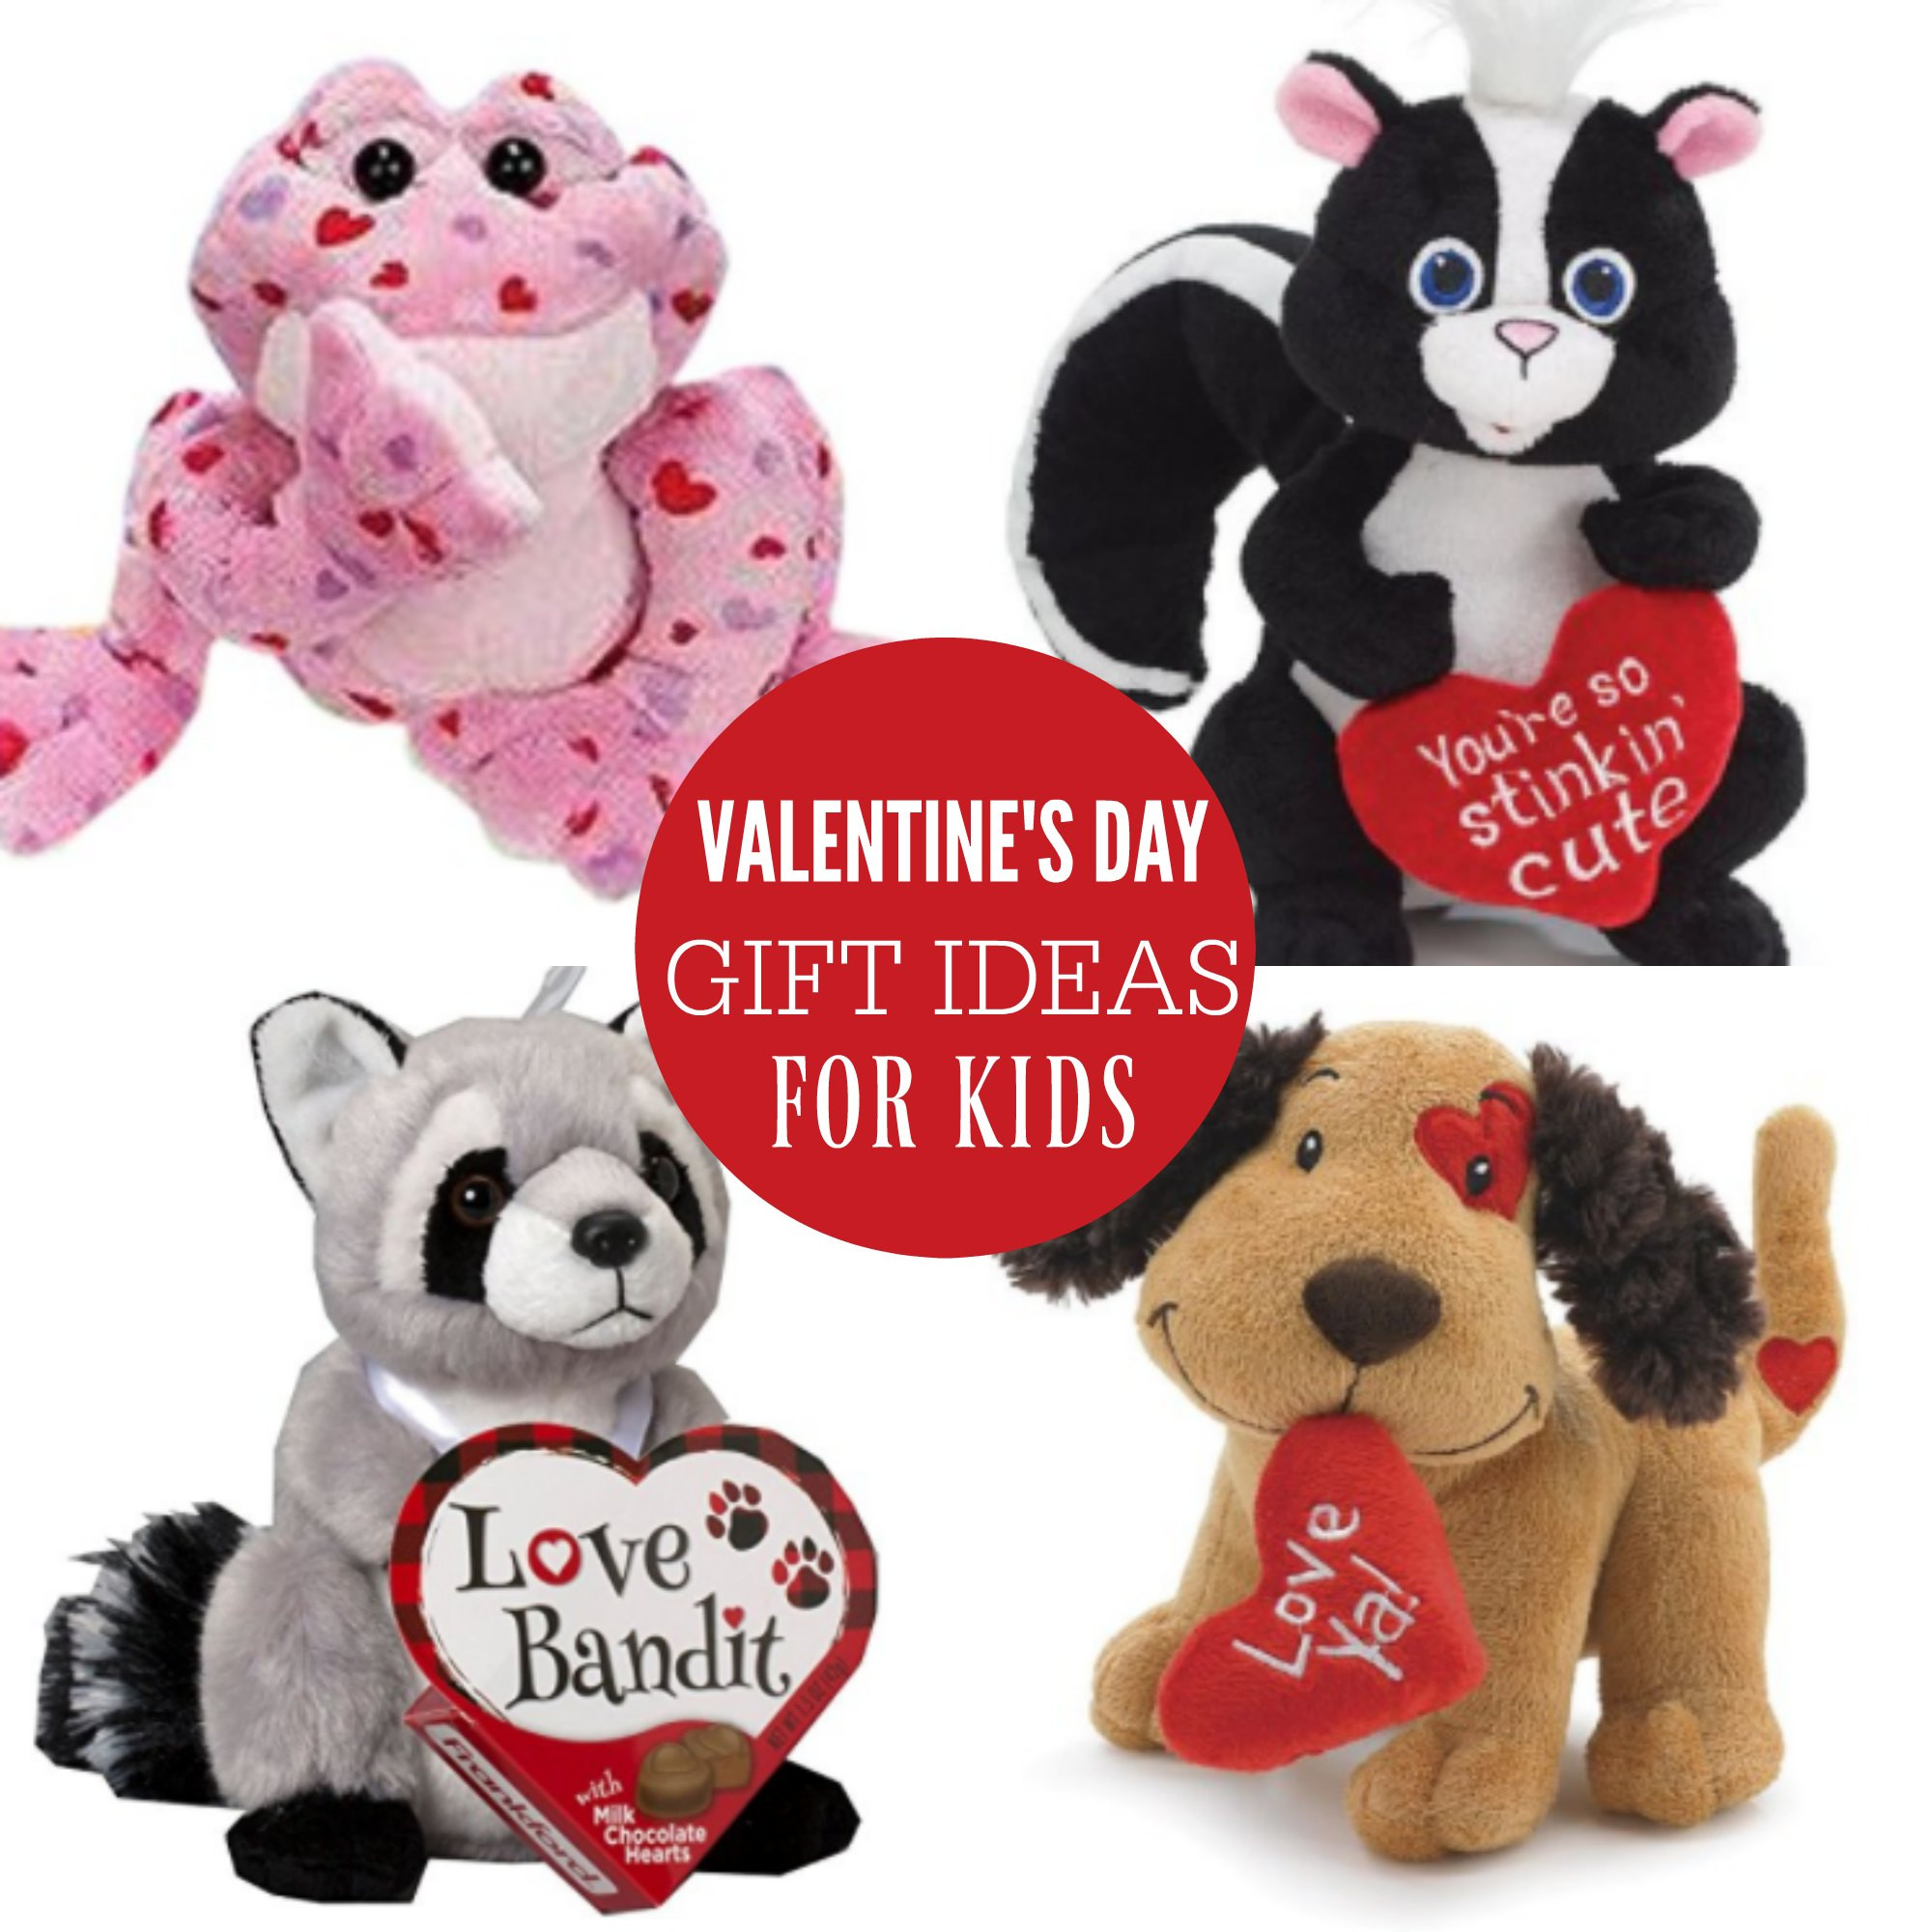 Childrens Valentines Gift Ideas
 Valentine Gift ideas for Kids That they will love